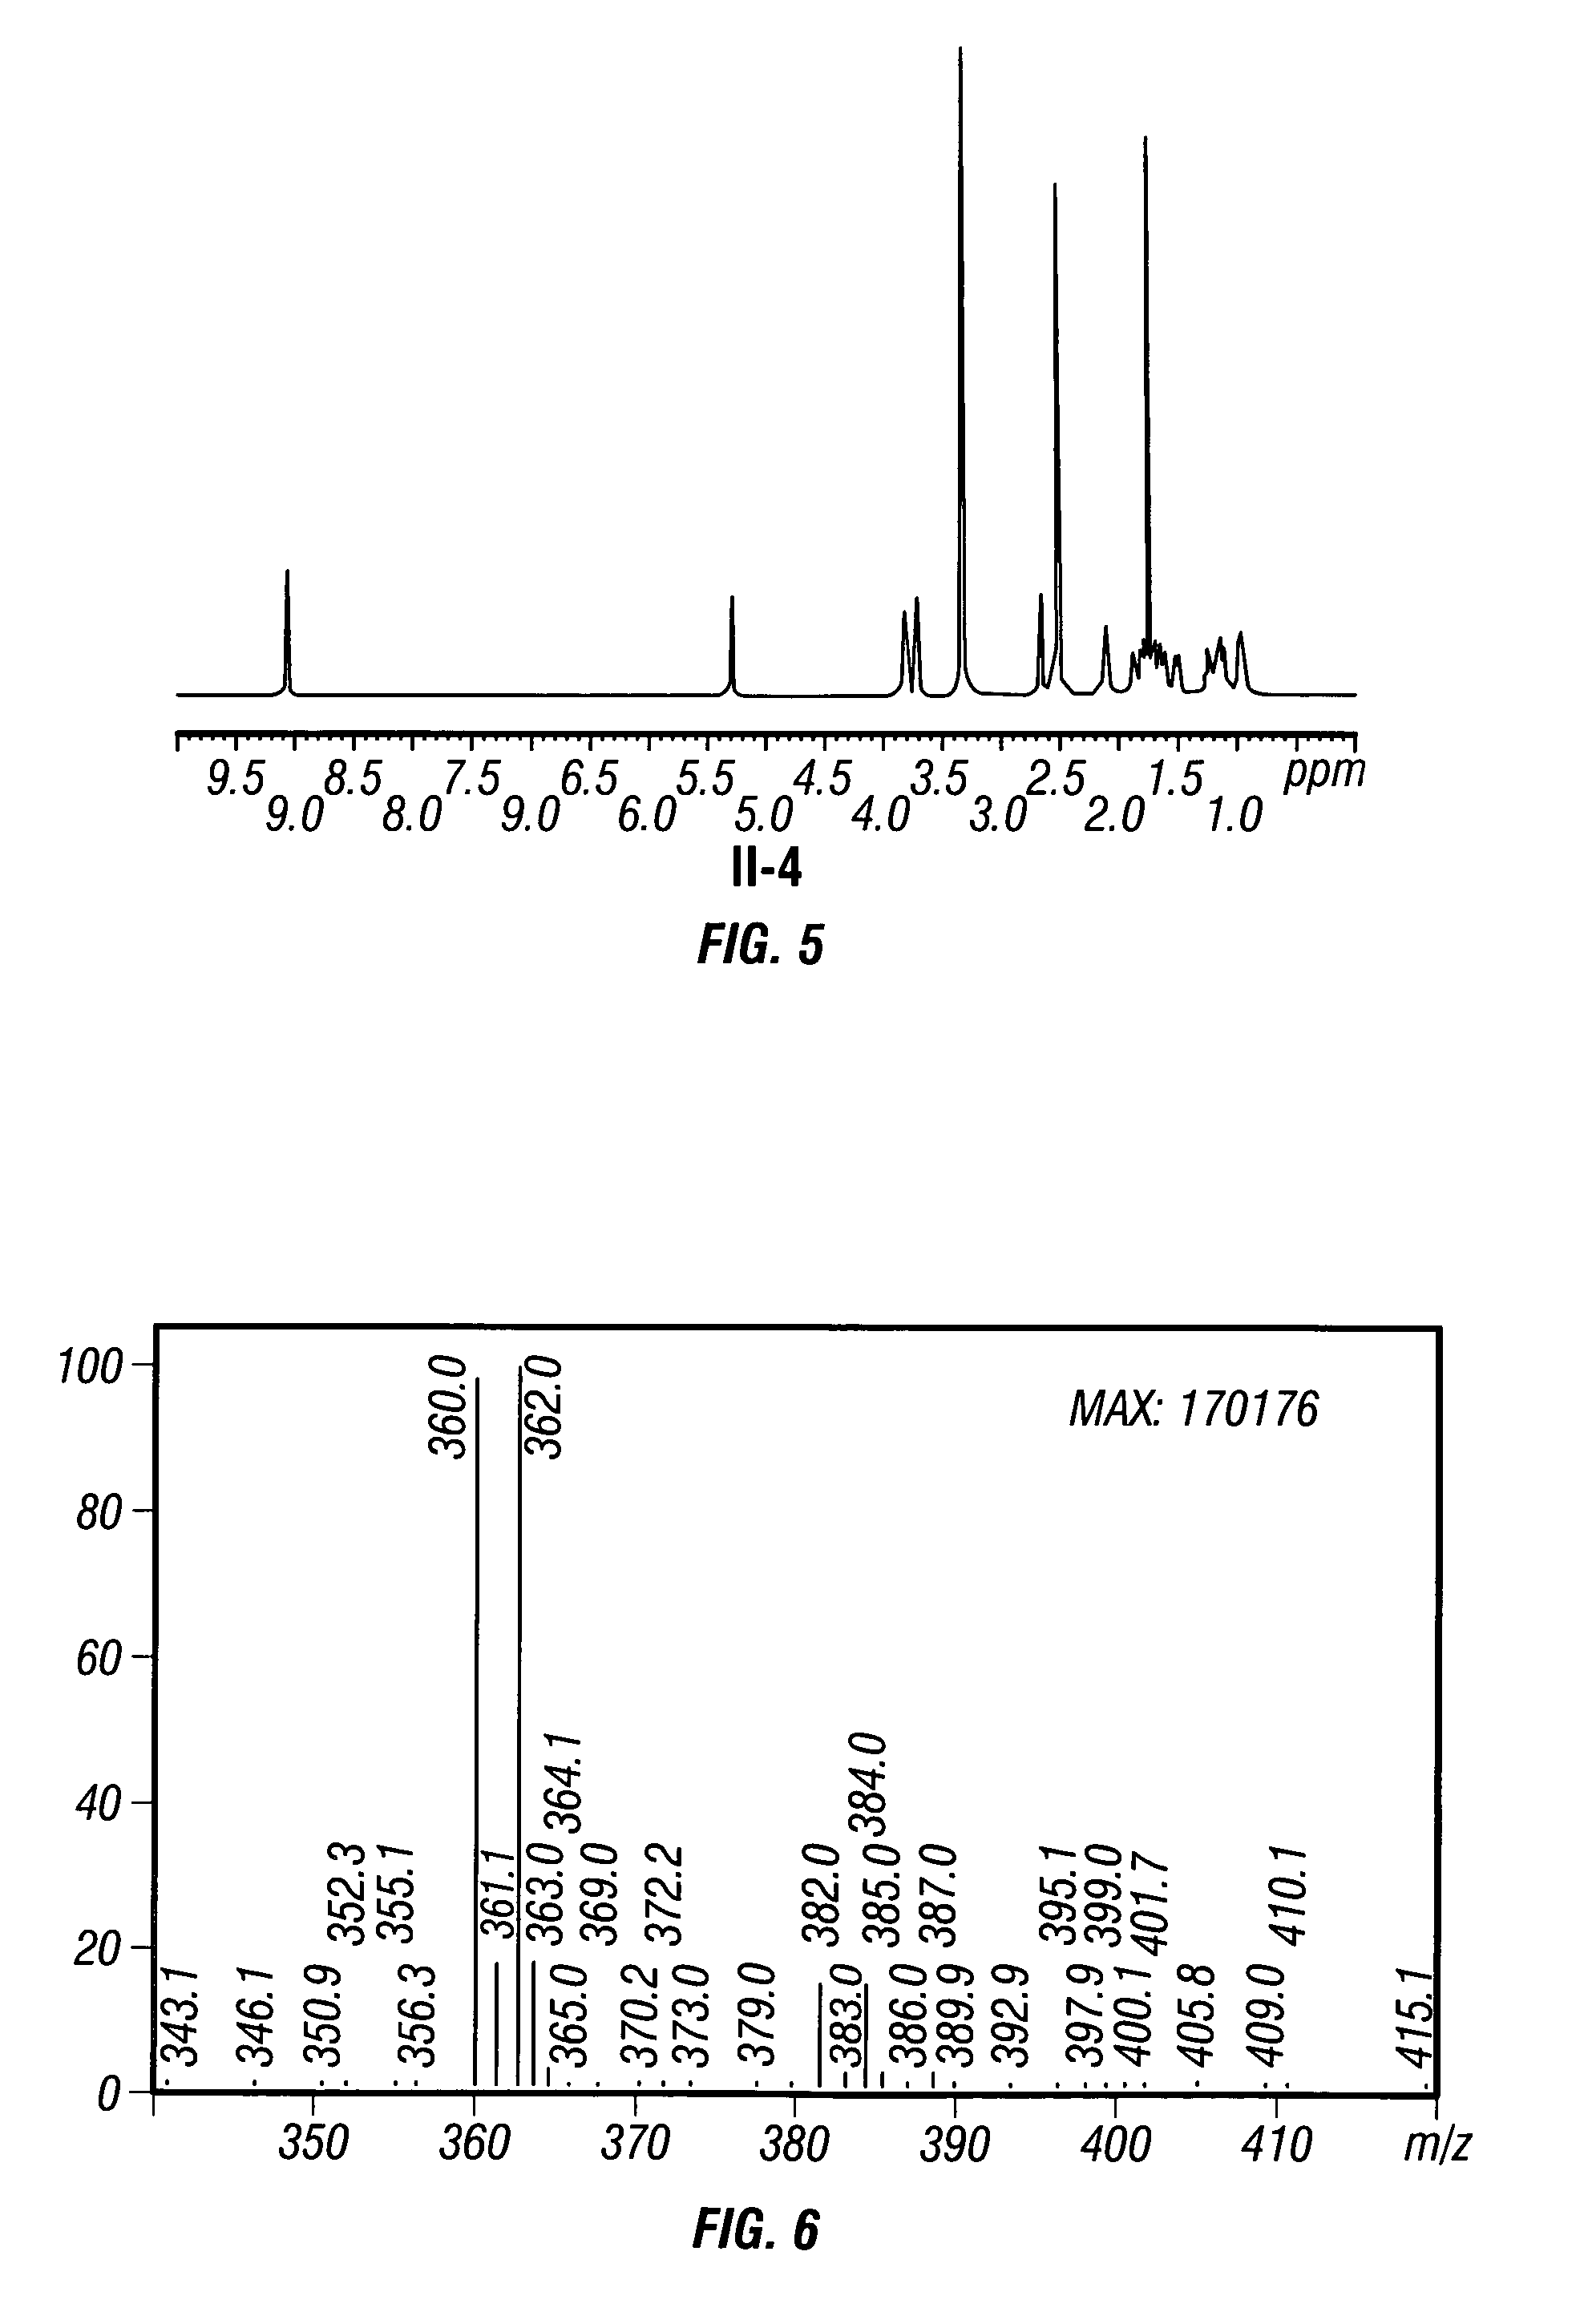 [3.2.0] Heterocyclic compounds and methods of using the same